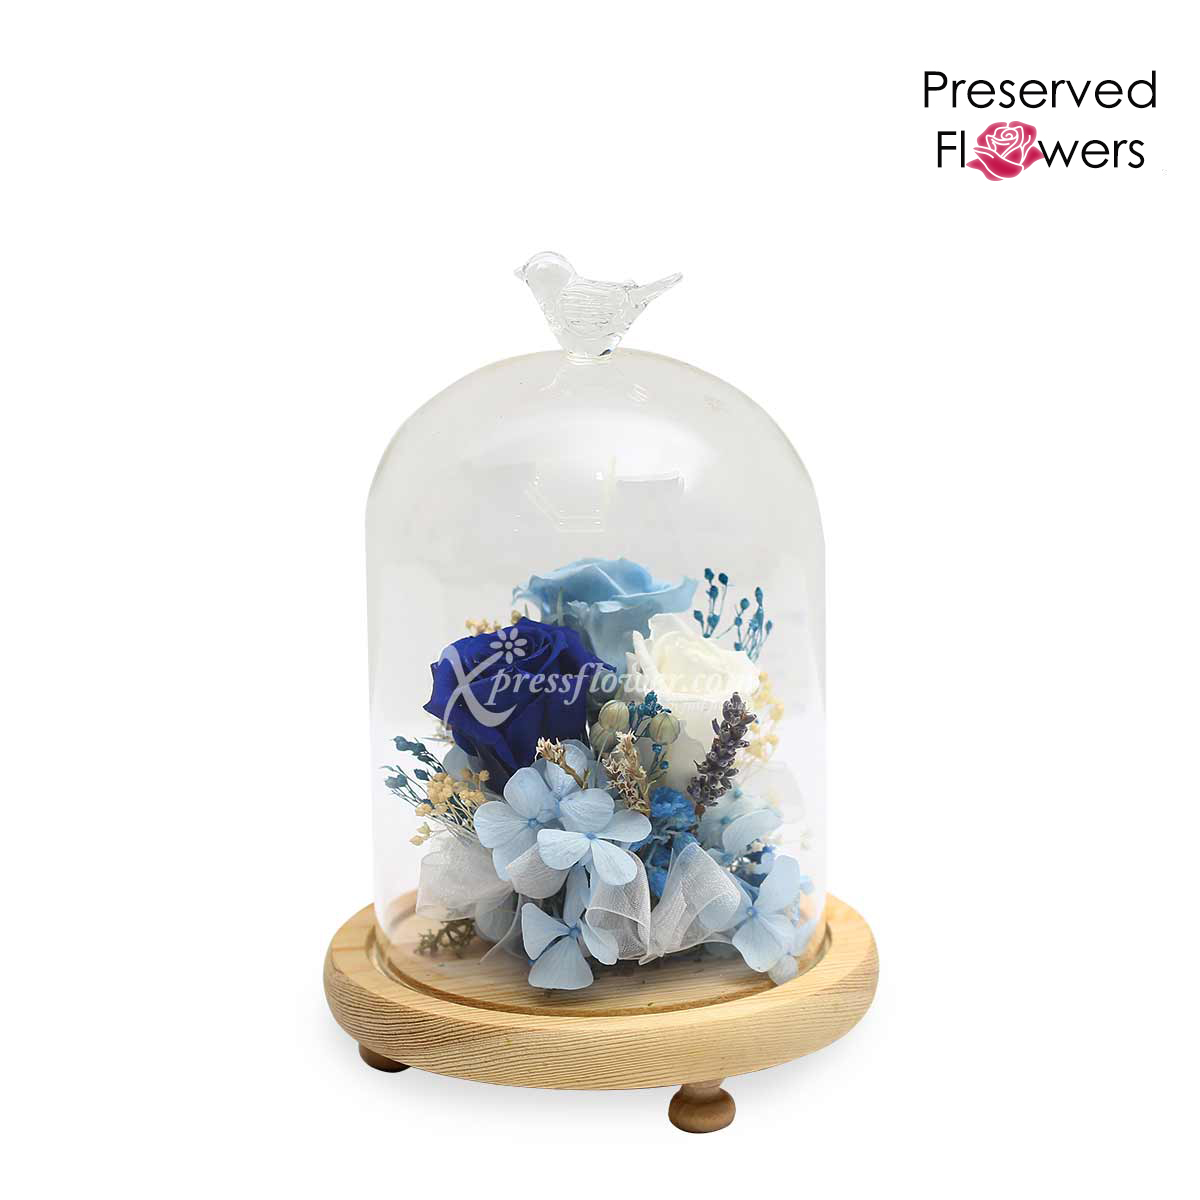 Frozen in Time (Preserved Flowers)